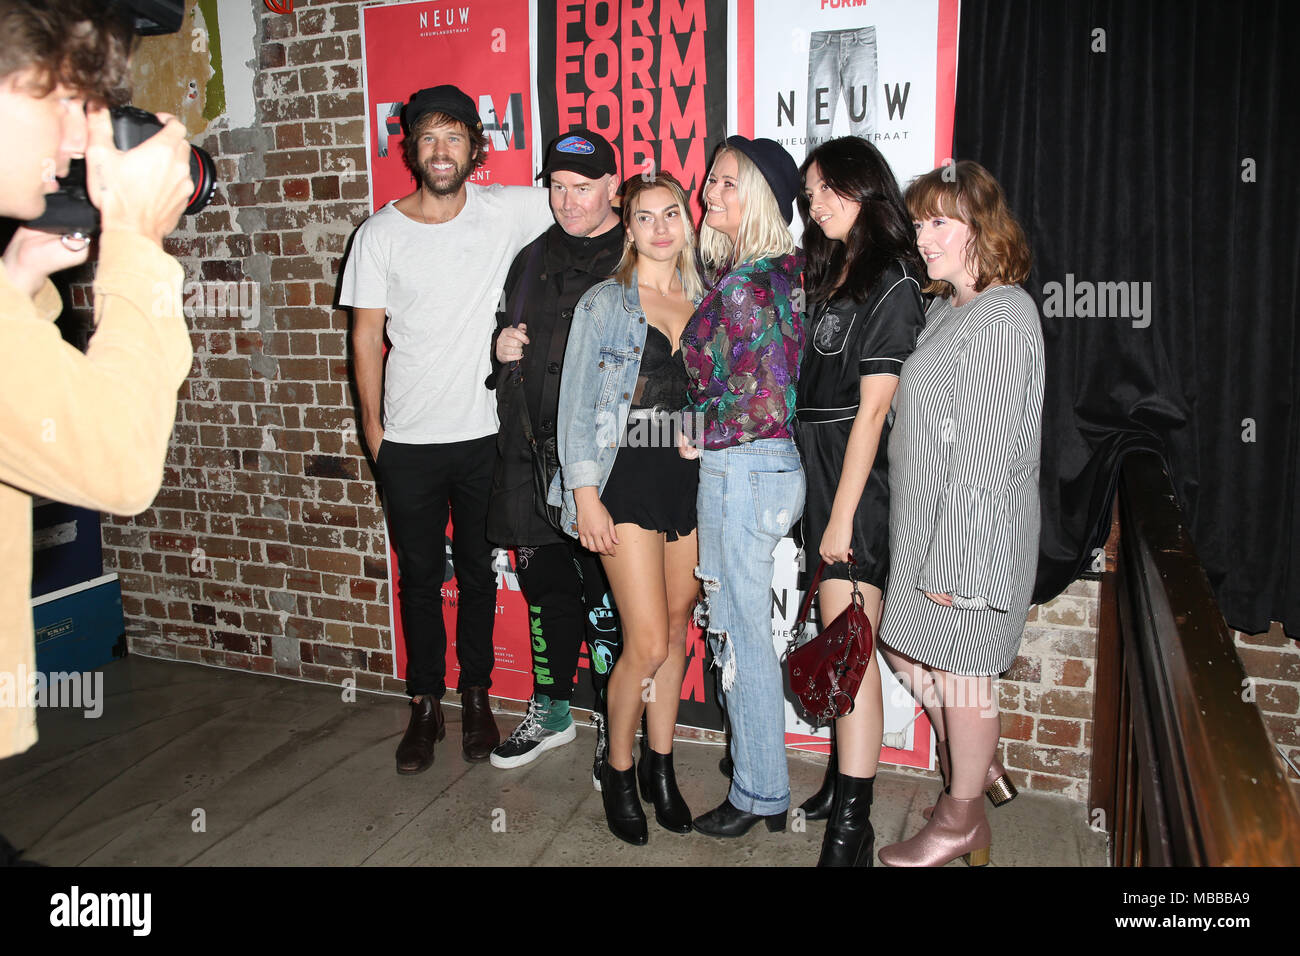 Sydney, Australia. 10 April 2018. Local celebrities and VIPs attend the Neuw Denim form party at The Lansdowne, Sydney. Pictured: Danny Clayton. Credit: Richard Milnes/Alamy Live News Stock Photo